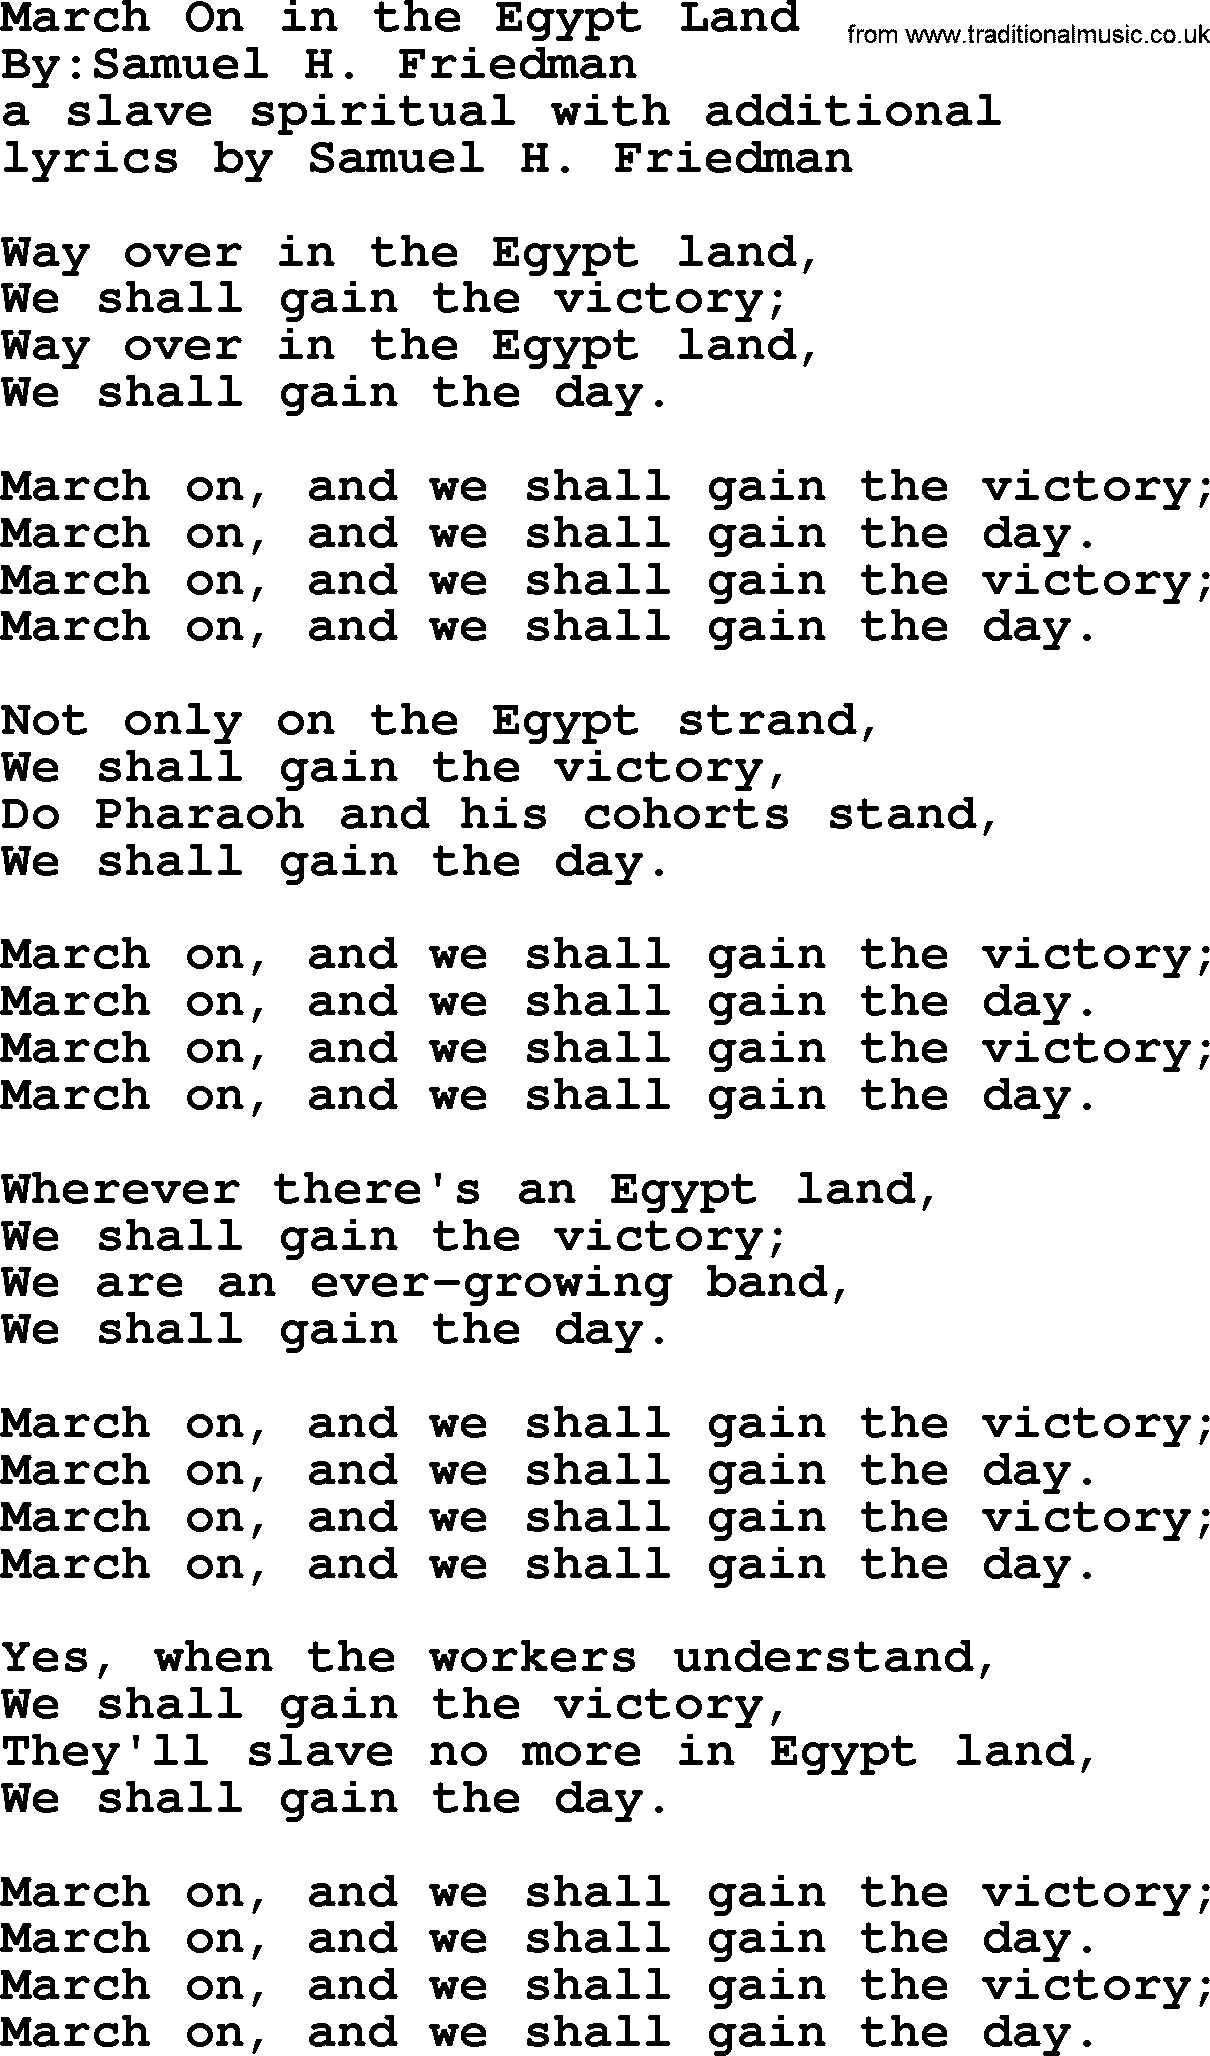 Political, Solidarity, Workers or Union song: March On In The Egypt Land, lyrics